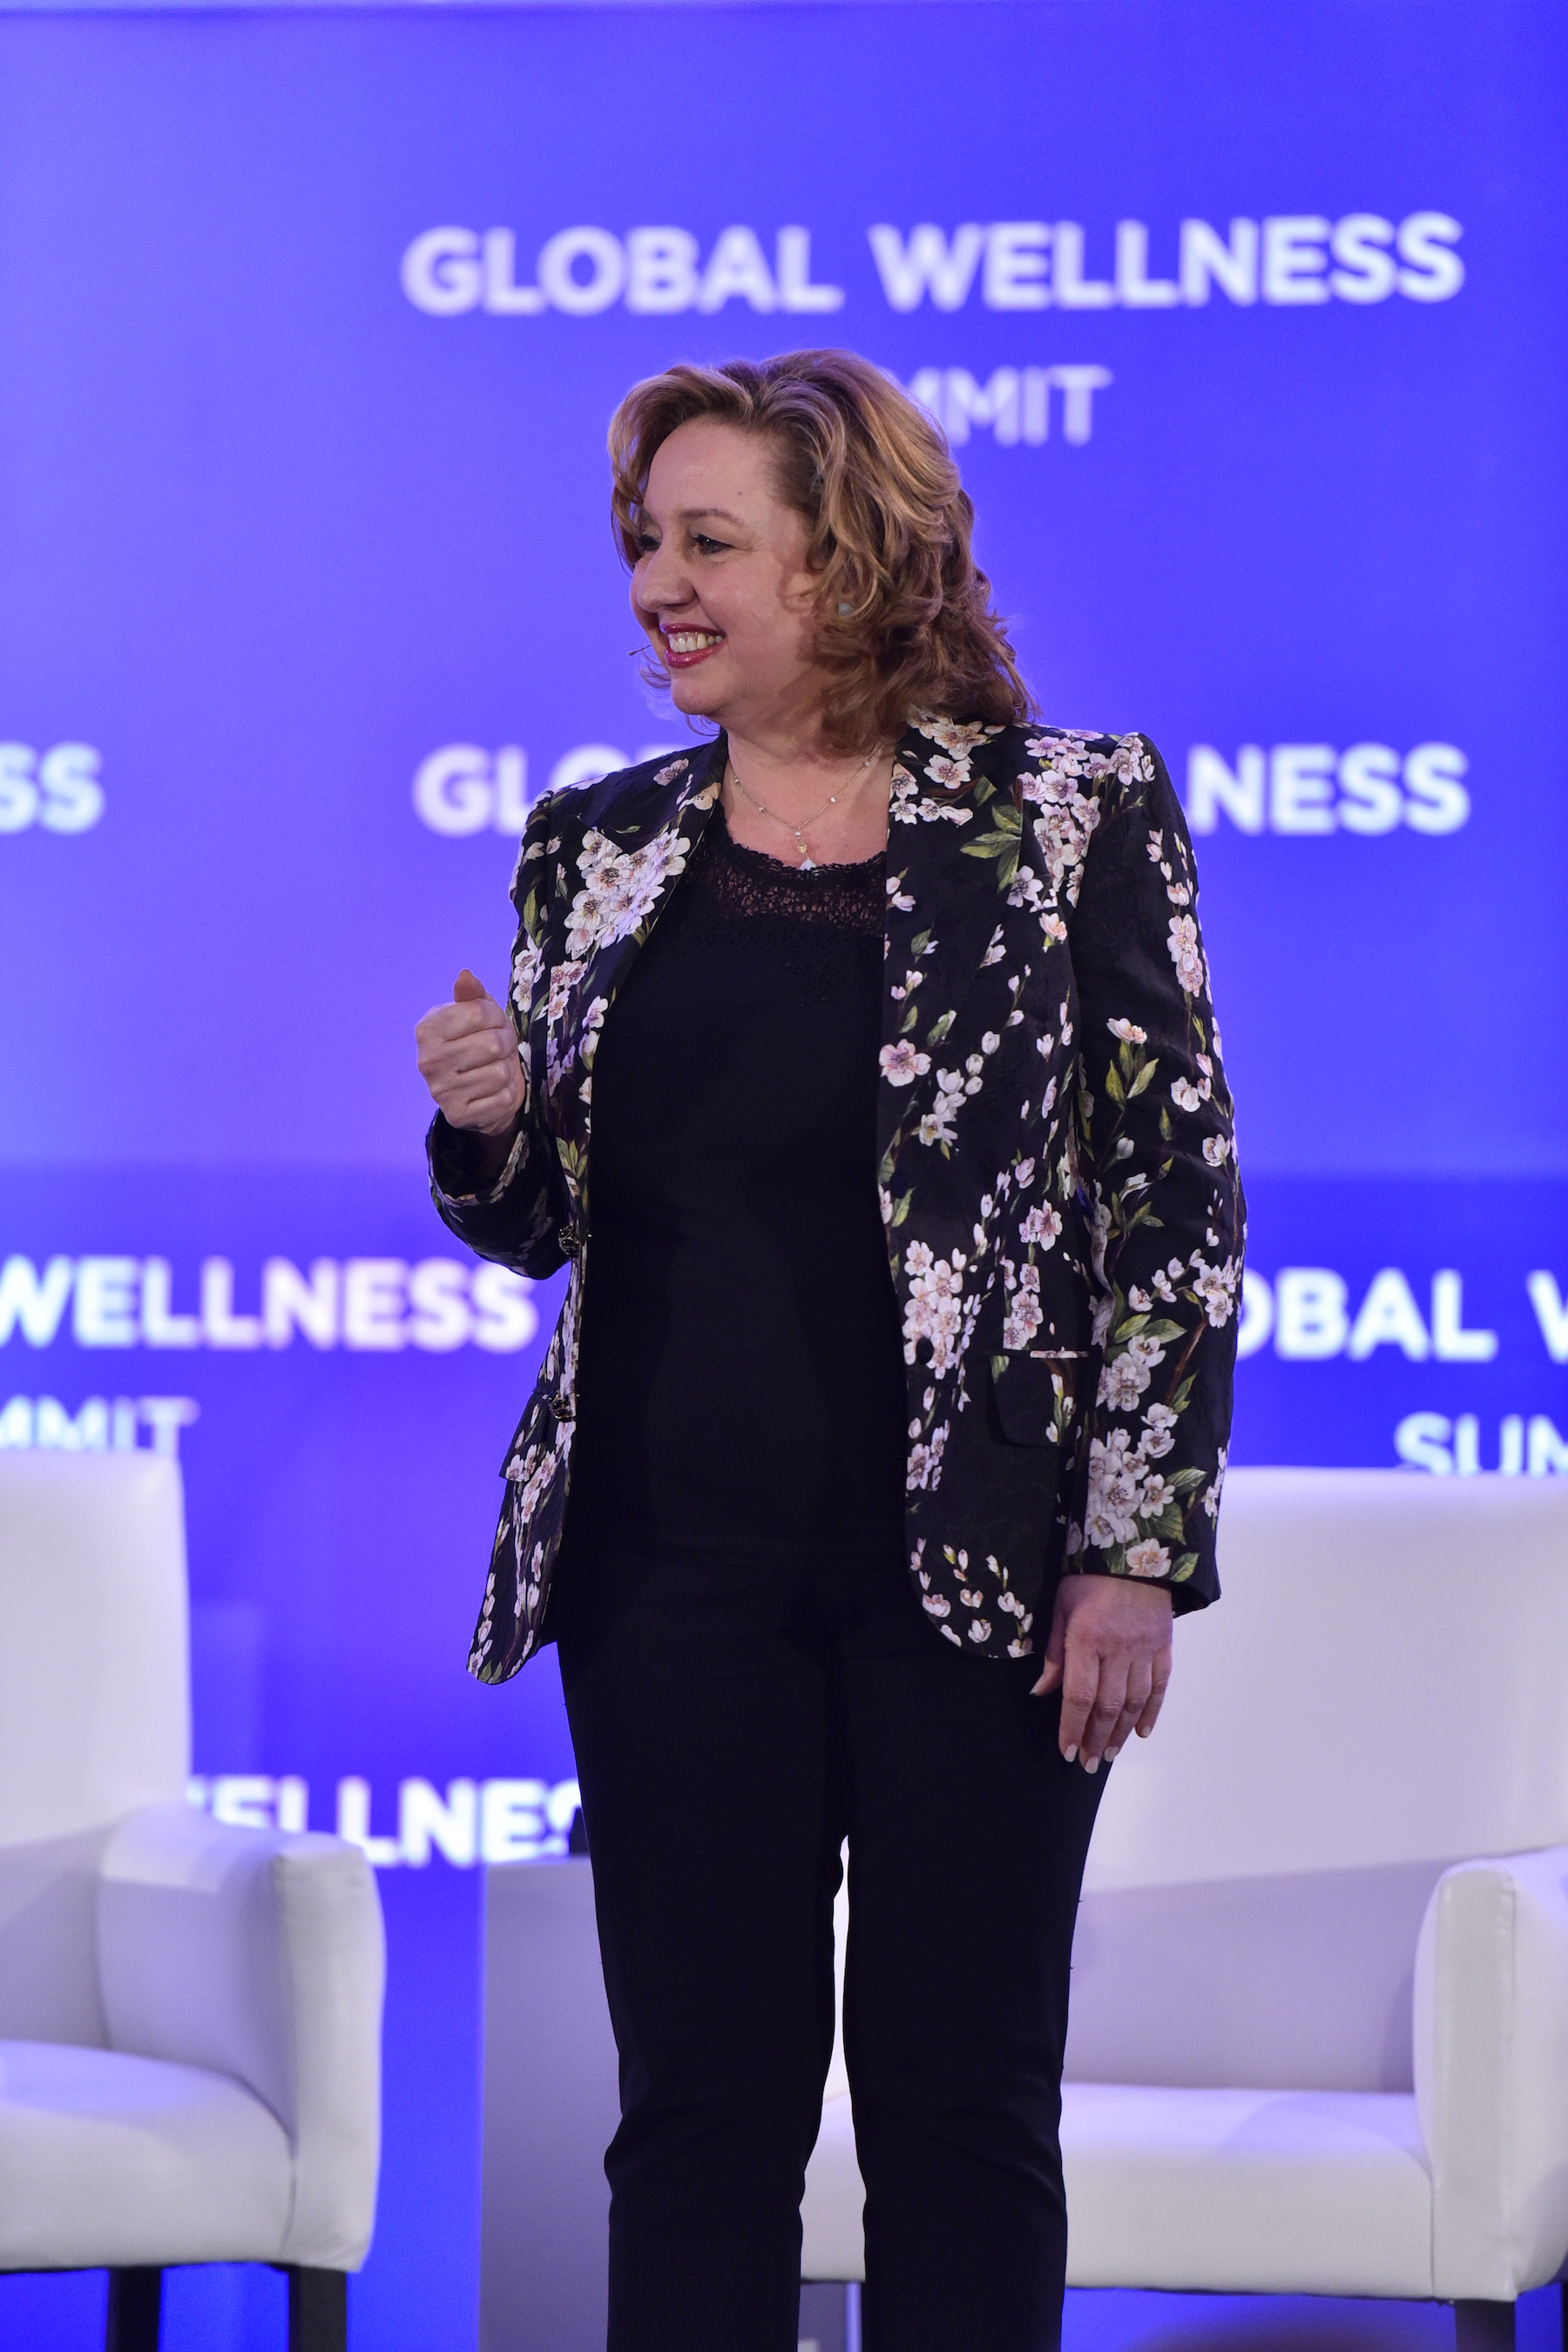 Agapi Stassinopoulos keynote on "Unbinding the Heart" and bringing wellness to the masses